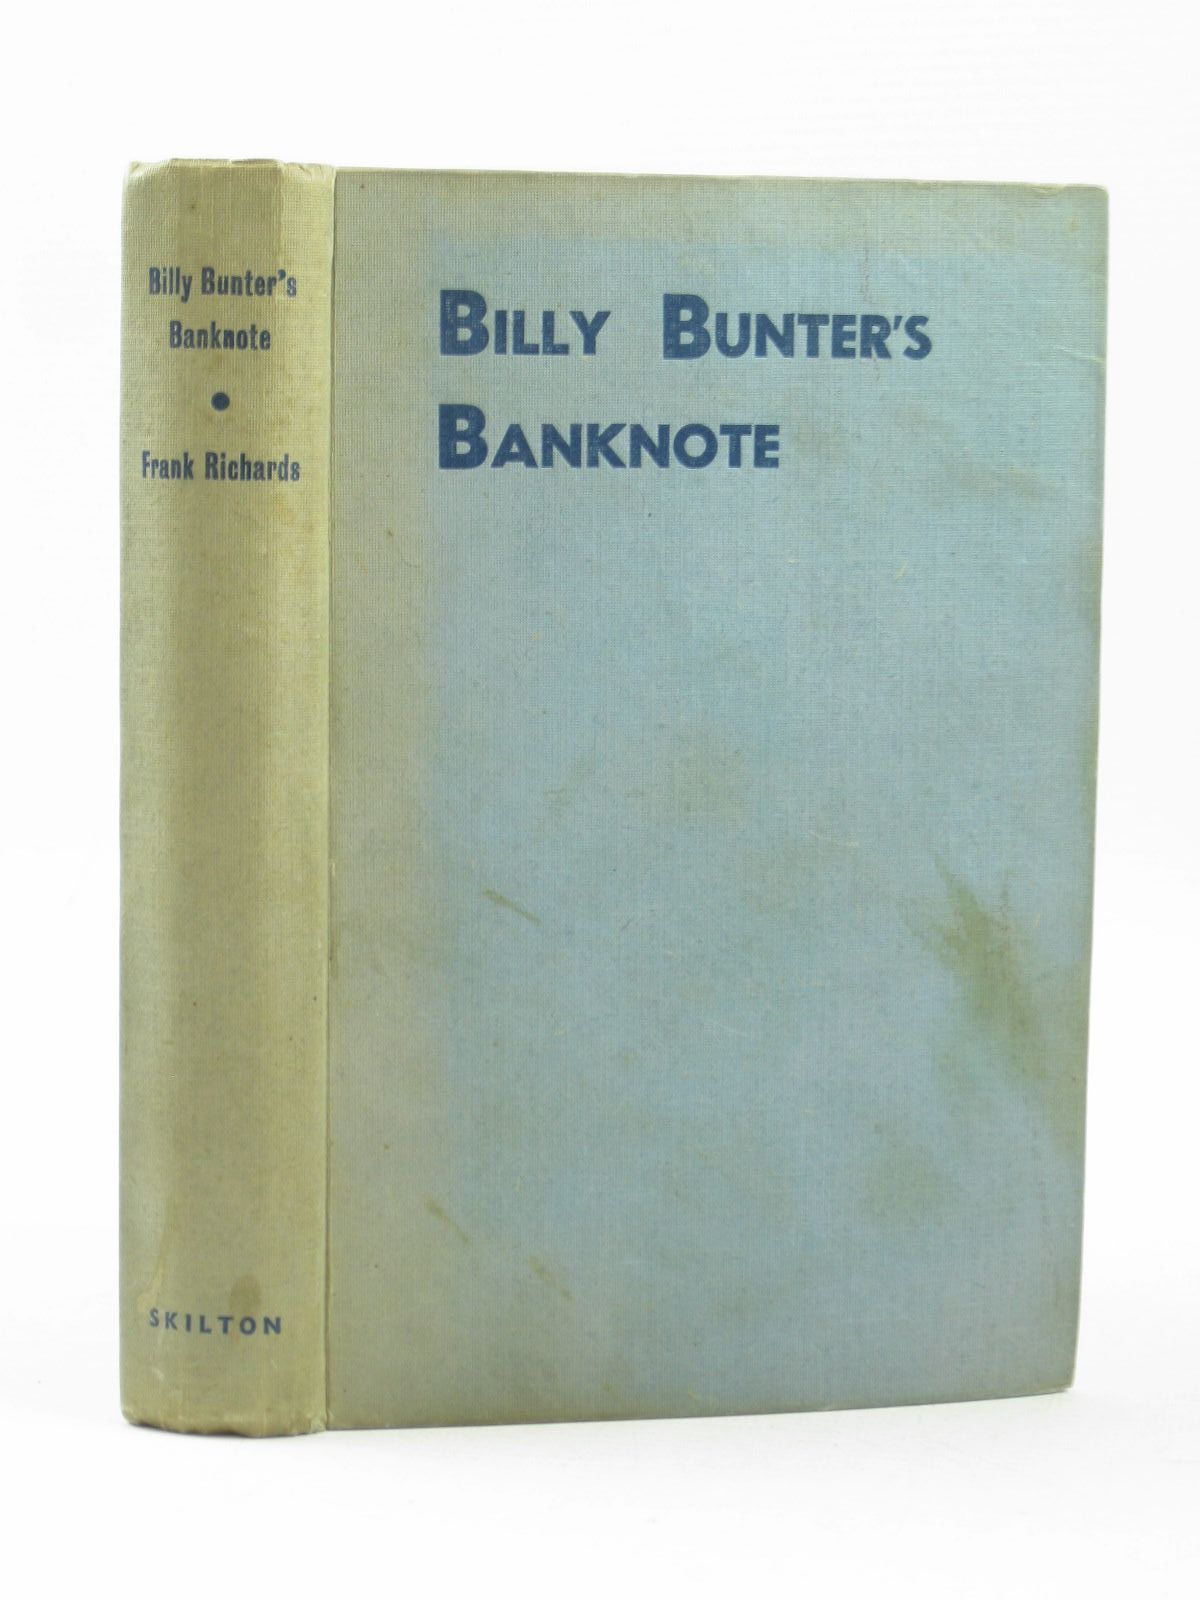 Photo of BILLY BUNTER'S BANKNOTE written by Richards, Frank illustrated by Macdonald, R.J. published by Charles Skilton (STOCK CODE: 1503734)  for sale by Stella & Rose's Books